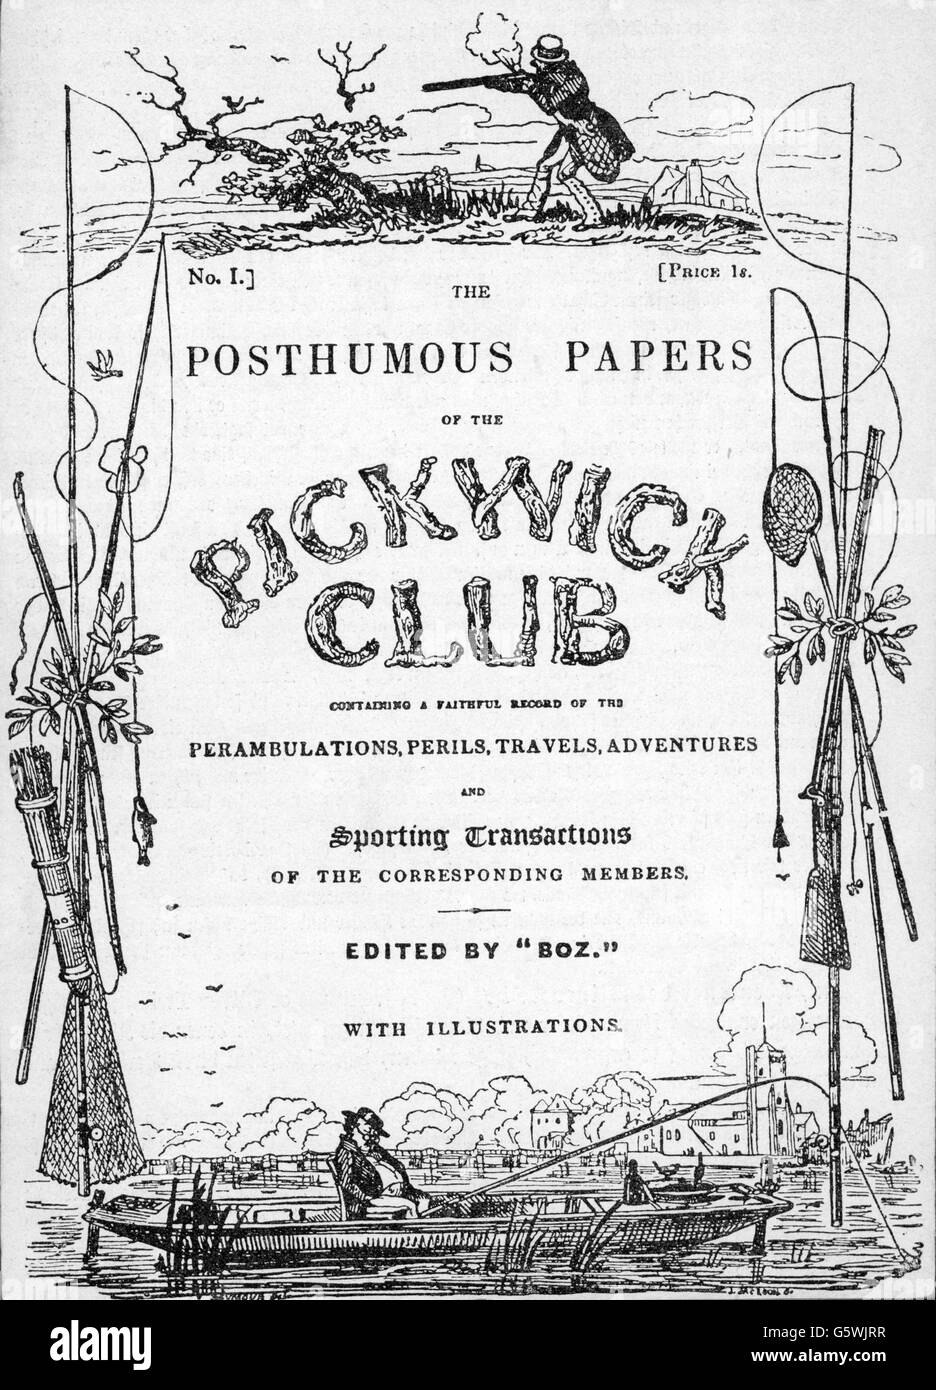 Dickens, Charles, 7.2.1812 - 9.7.1870, English author / writer, works, 'The Posthumous Papers of the Pickwick Club', title page, first edition, Chapman & Hall, London, 1837, Stock Photo